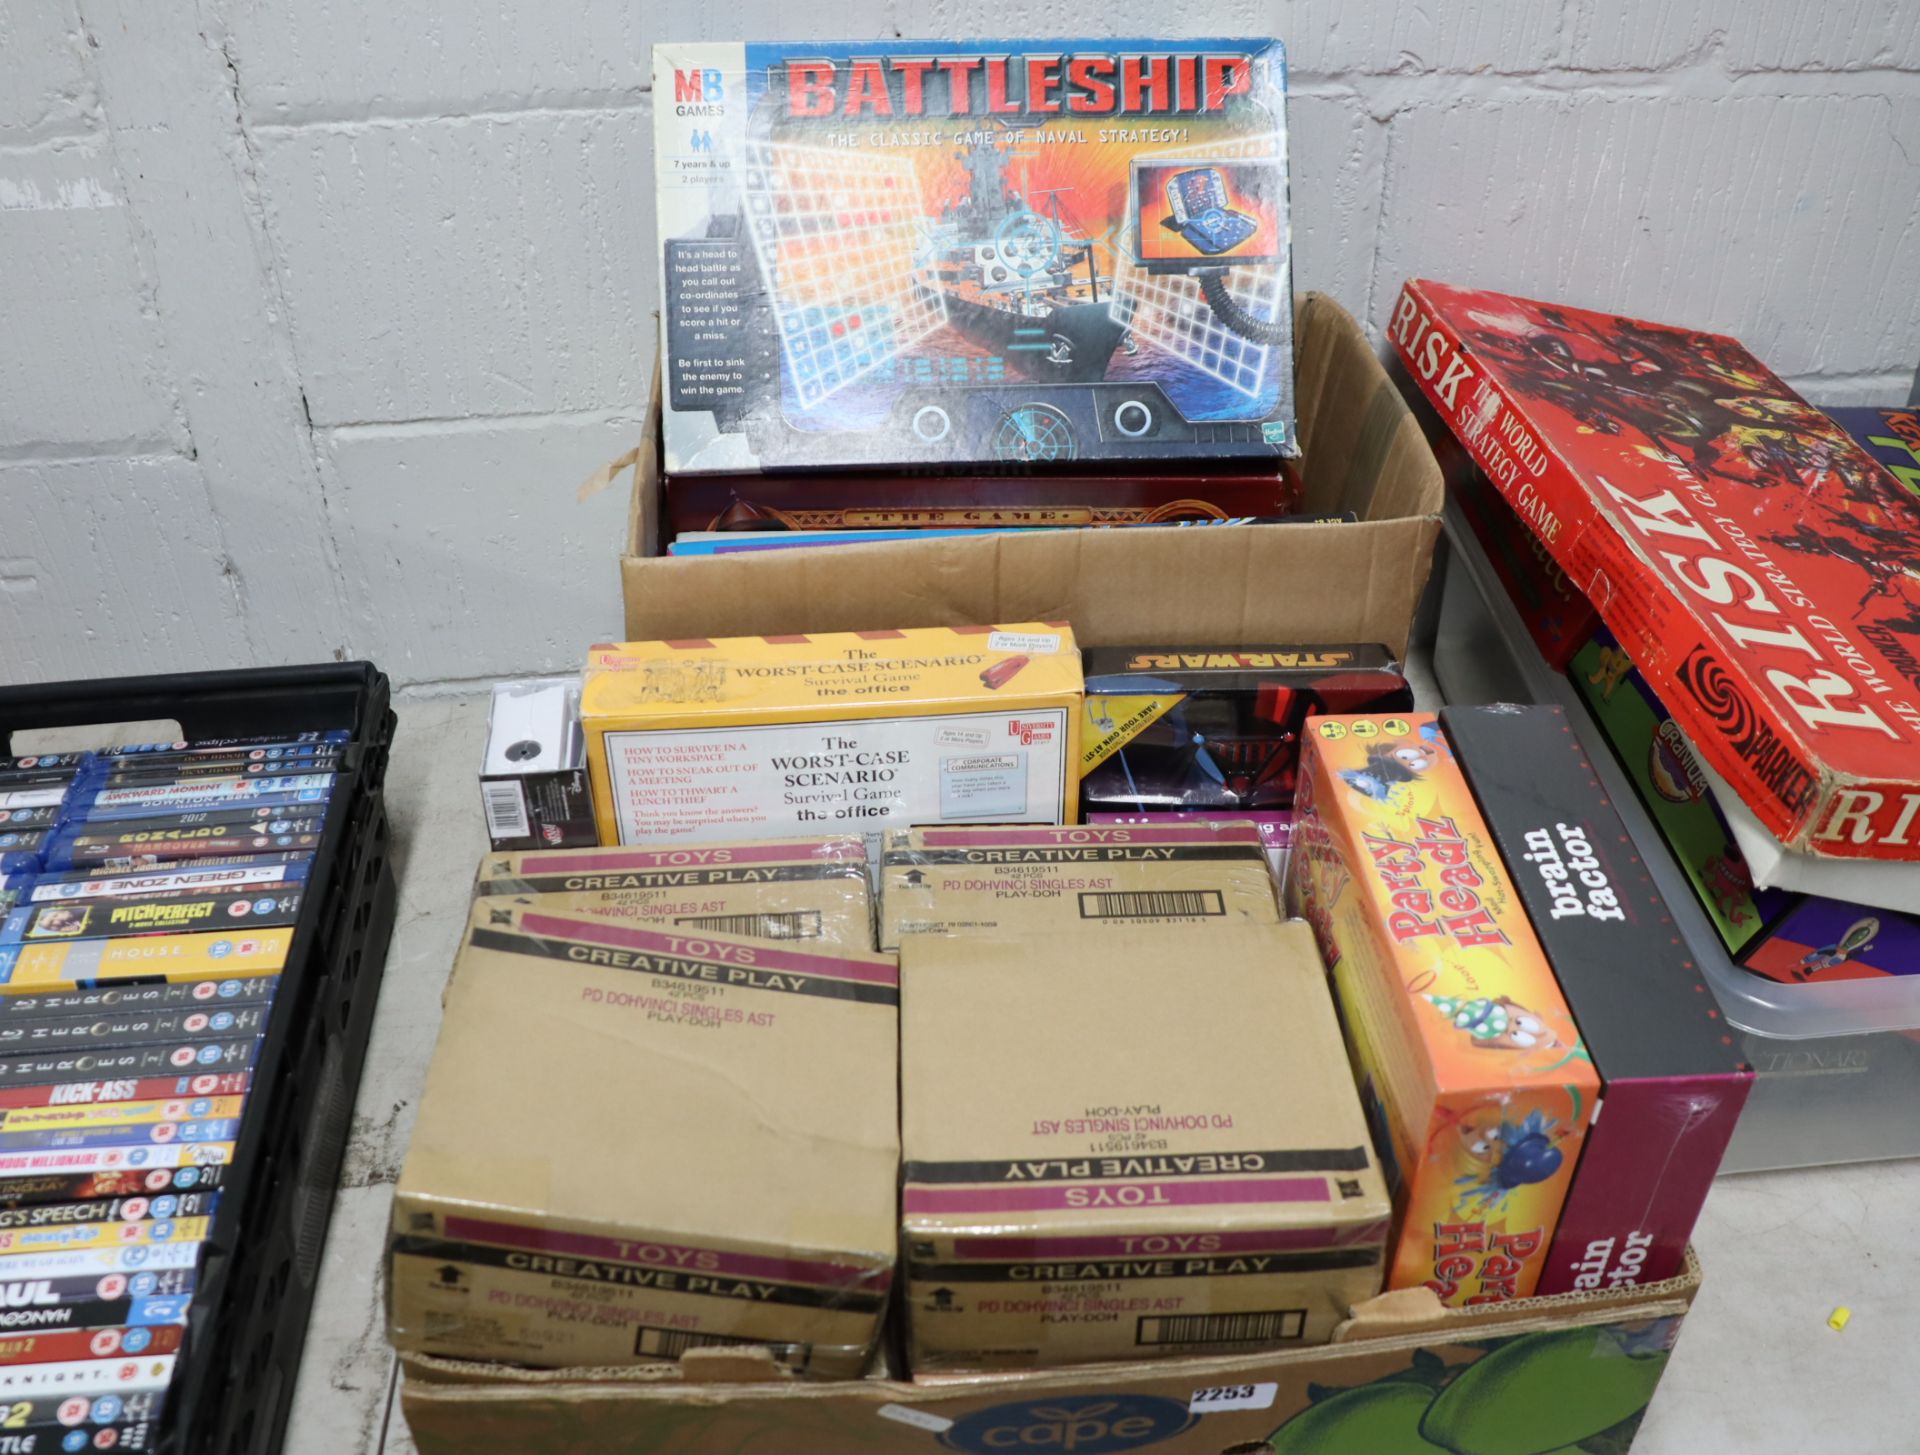 Box of board games incl. Battleship and Jumanji with box containing creative play toys, Star Wars